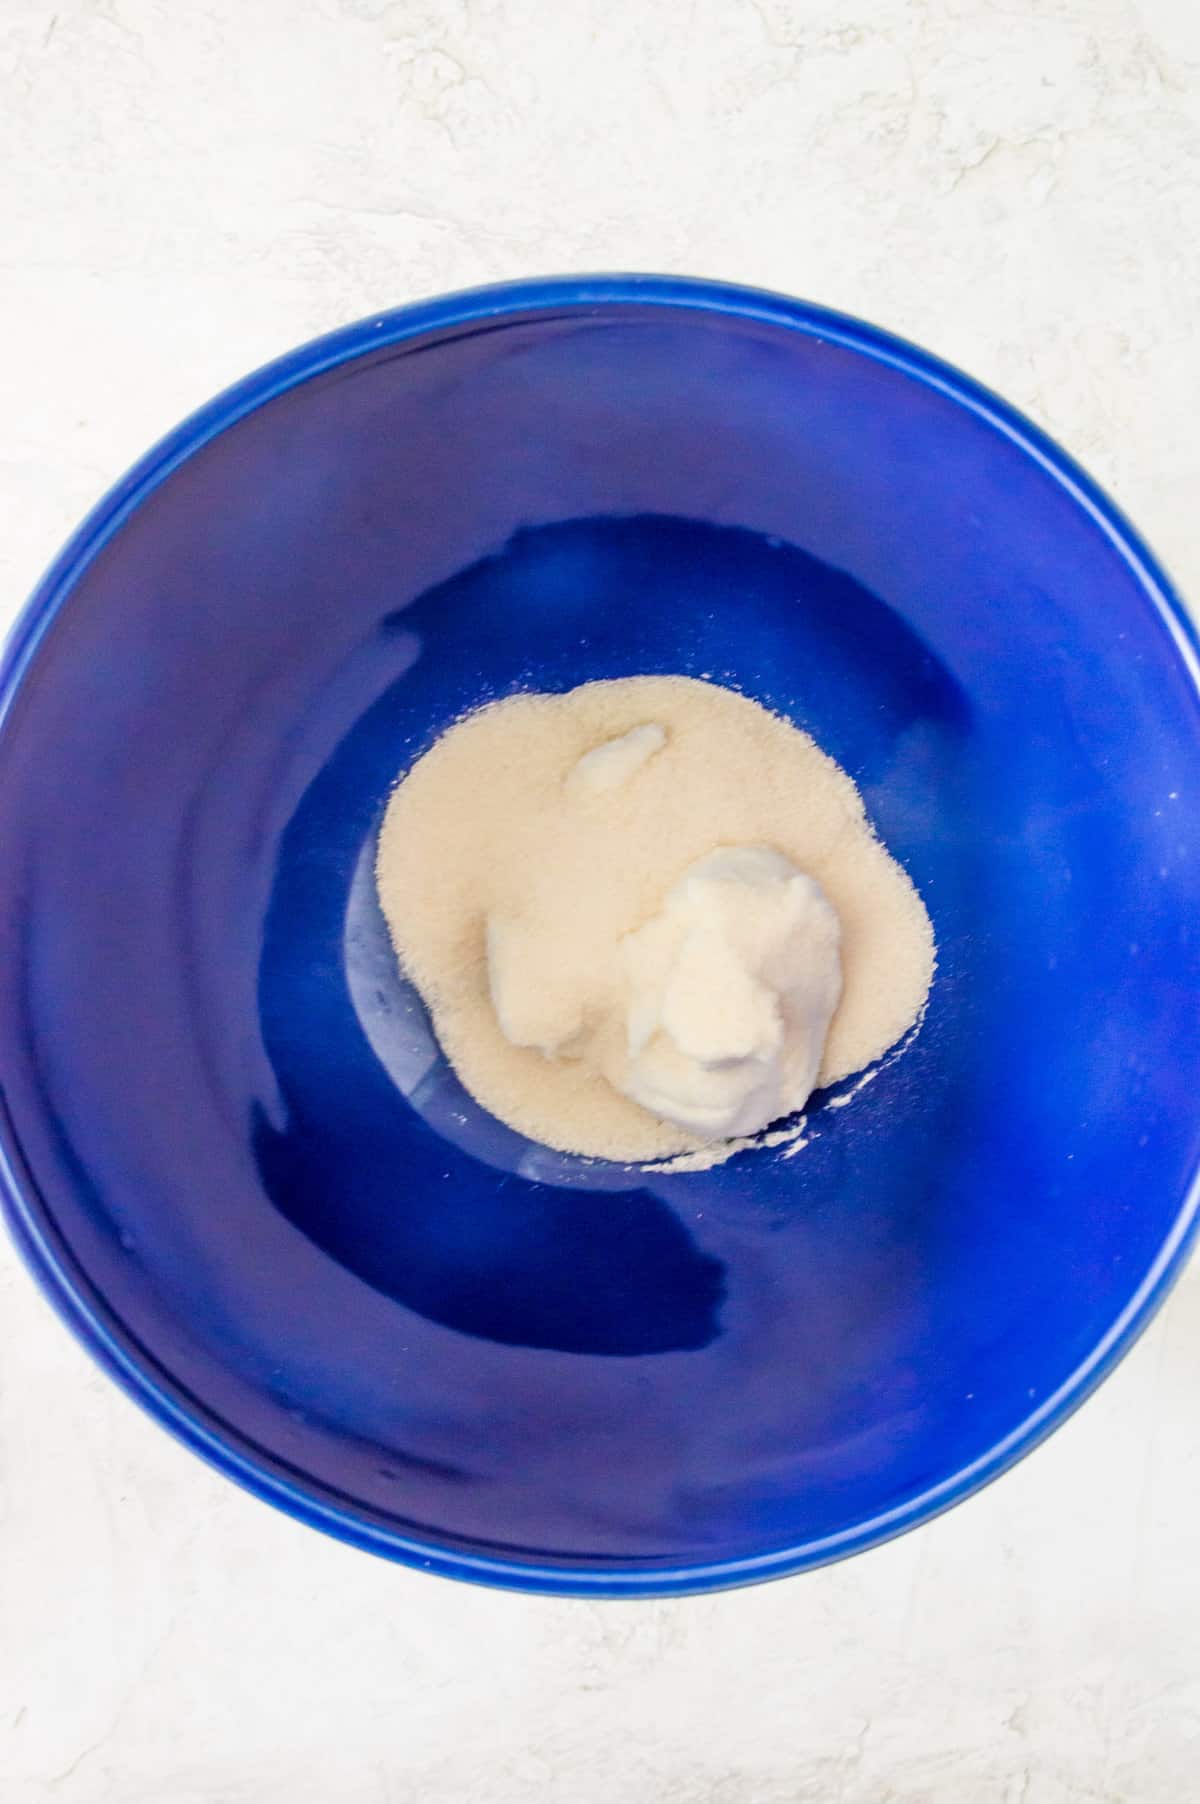 Cream cheese and cane sugar in a large blue bowl.